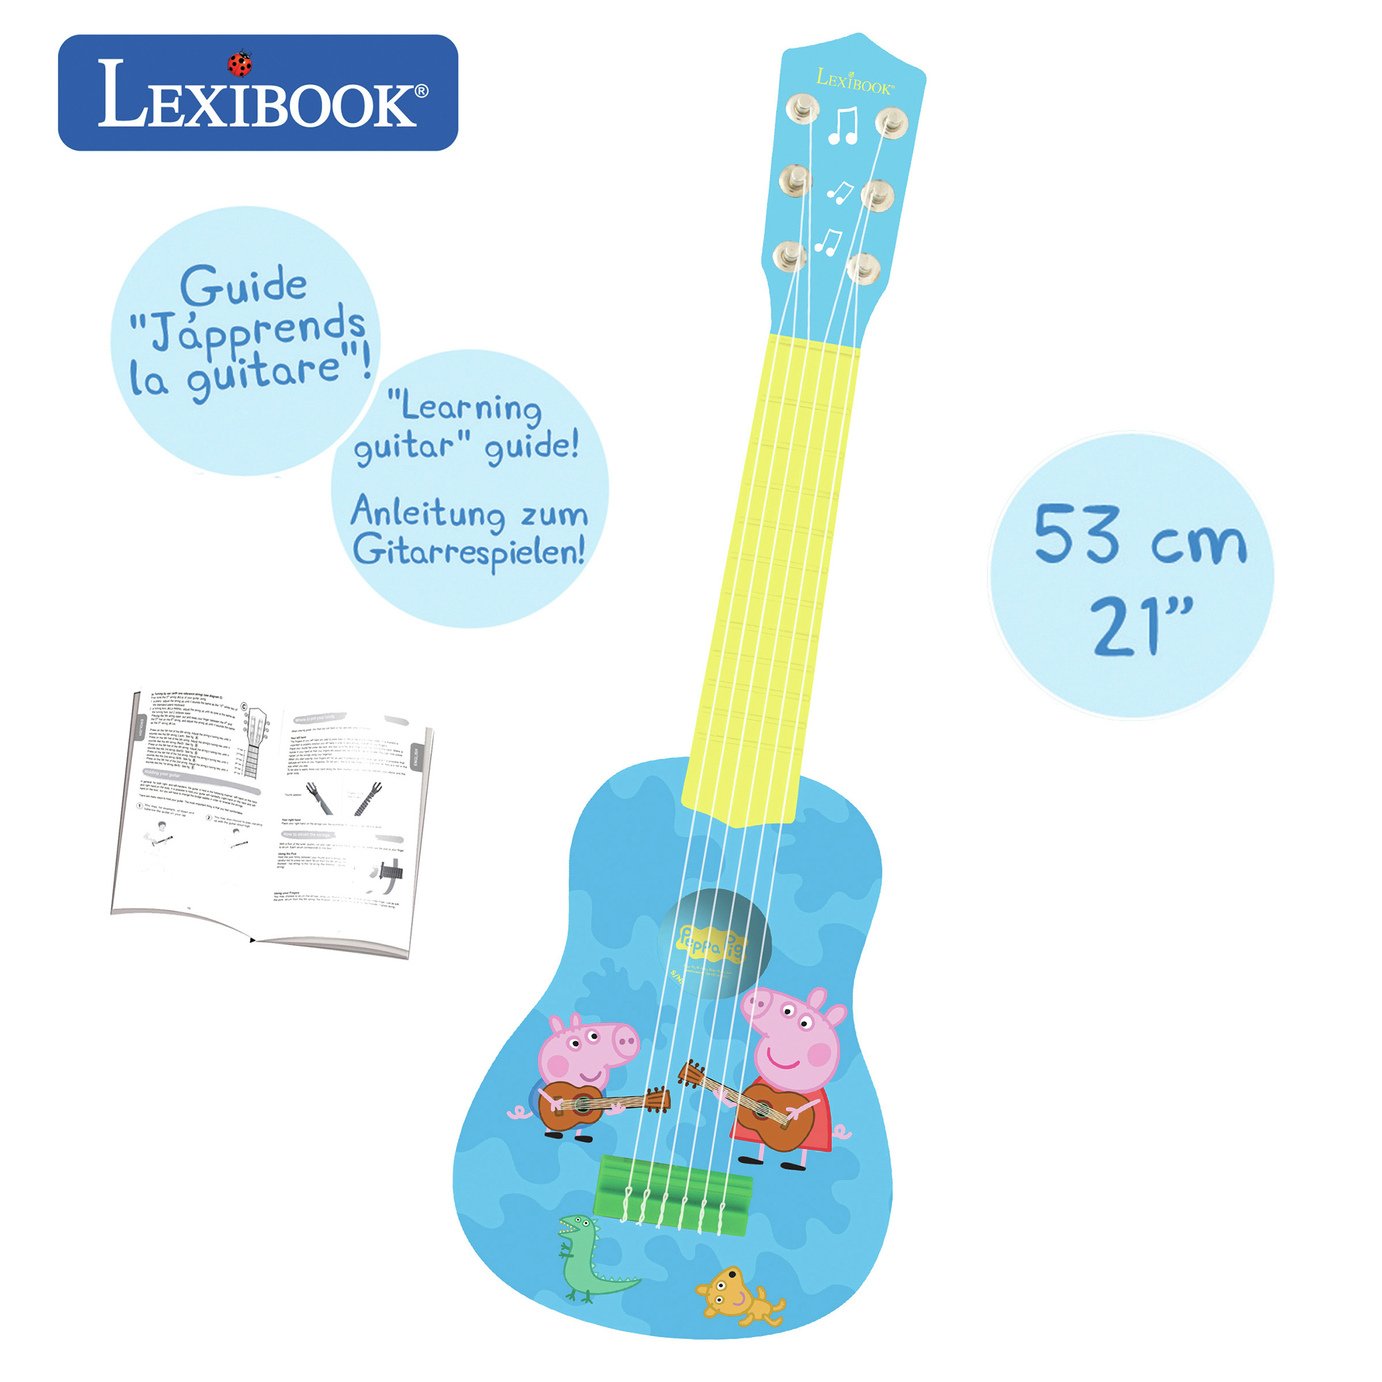 Peppa Pig My 1st Guitar Review